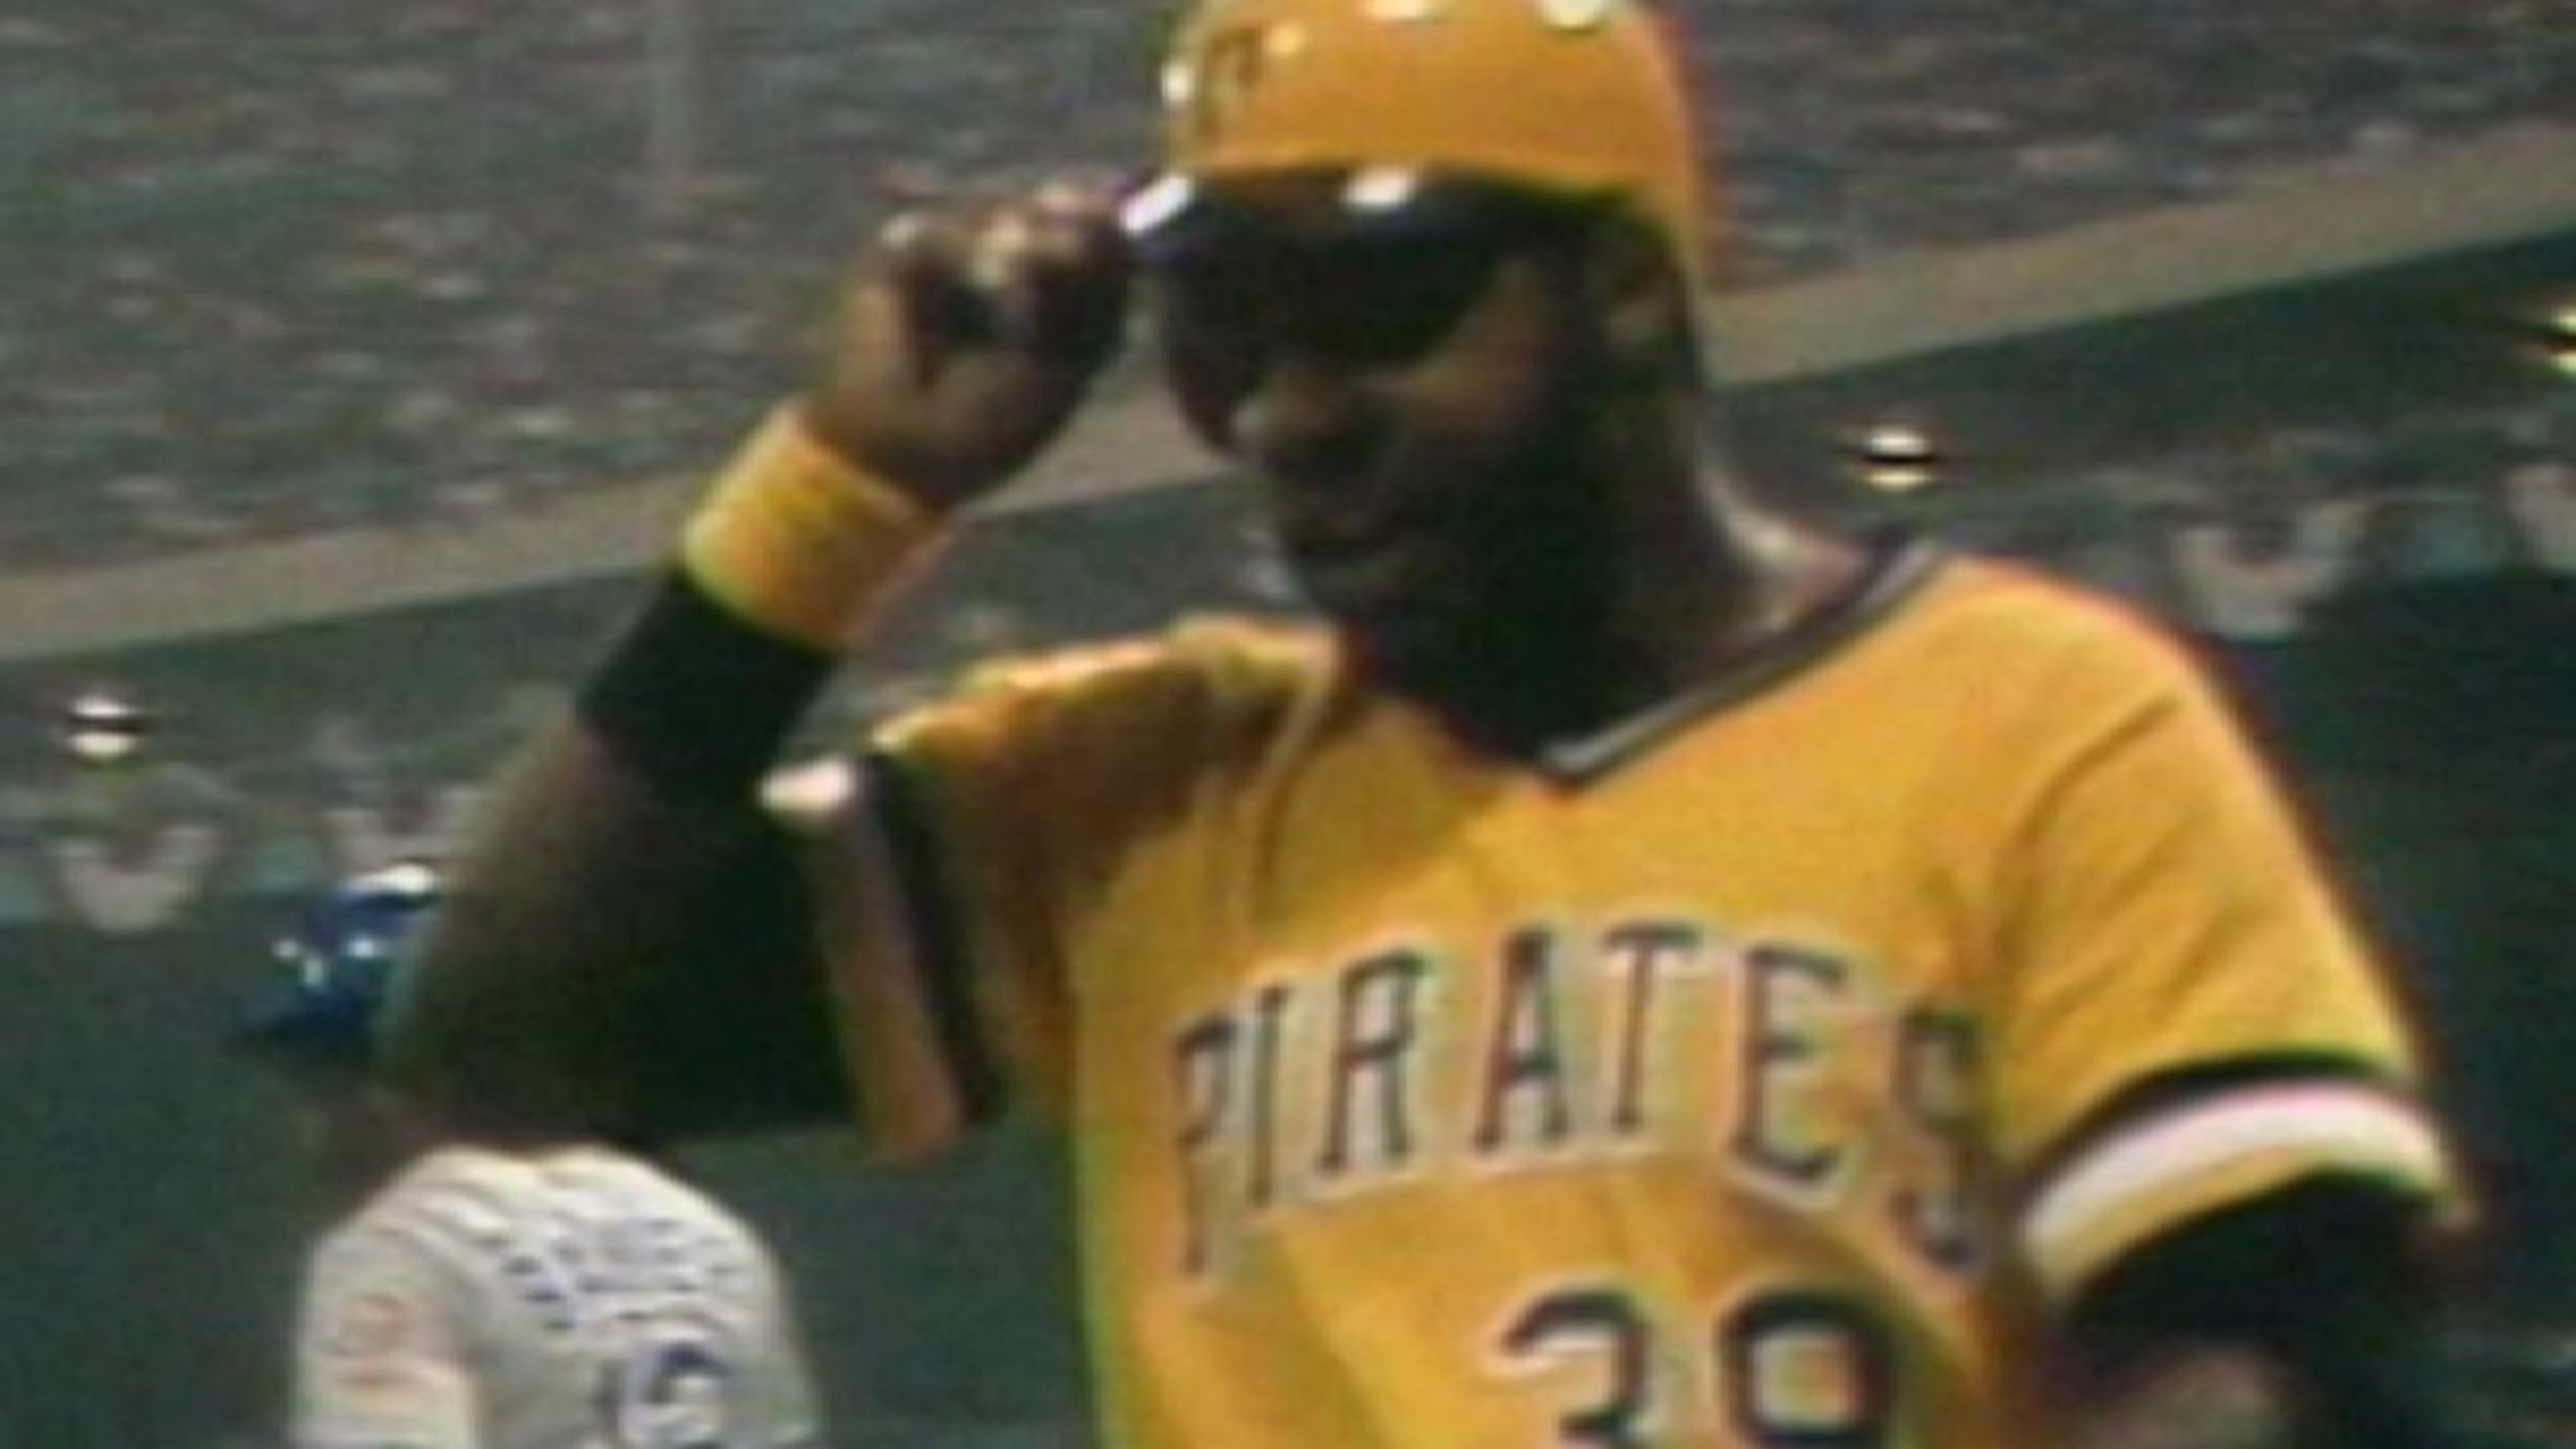 Dave Parker lives with Parkinson's disease as another Hall of Fame